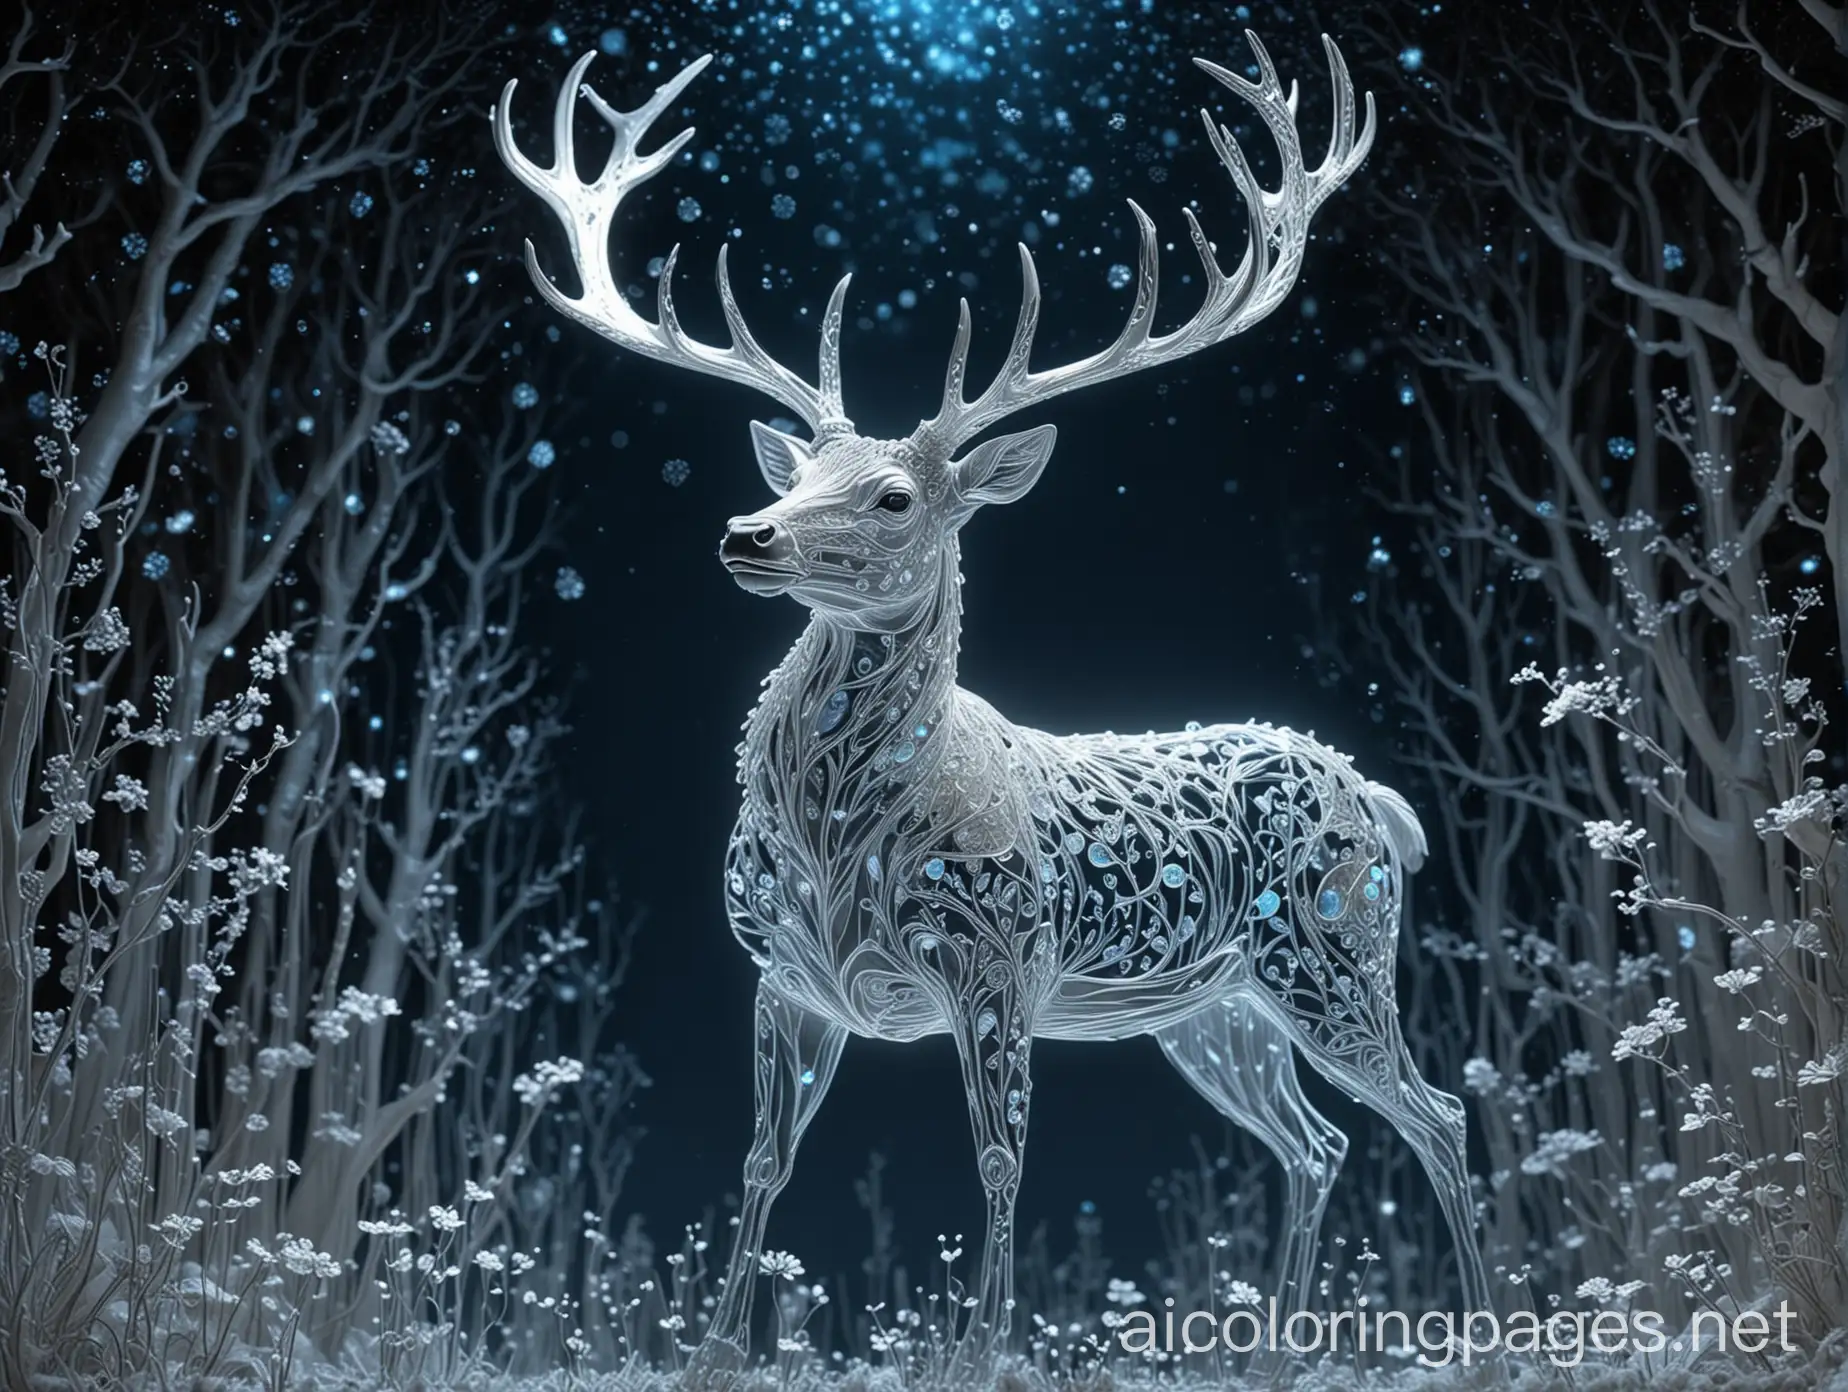 transparent glass deer filled with bioluminescent plants, : luminous, opalescent, Insanely detailed beautiful deer with glass antlers : meticulously detailed filigree deer: extreme contrast and saturation : starry galactic night sky background : magical fantasy artwork : ultra high quality : dramatic lighting : extreme contrast : rule of thirds : HDR : photorealistic : florescent light, Coloring Page, black and white, line art, white background, Simplicity, Ample White Space. The background of the coloring page is plain white to make it easy for young children to color within the lines. The outlines of all the subjects are easy to distinguish, making it simple for kids to color without too much difficulty